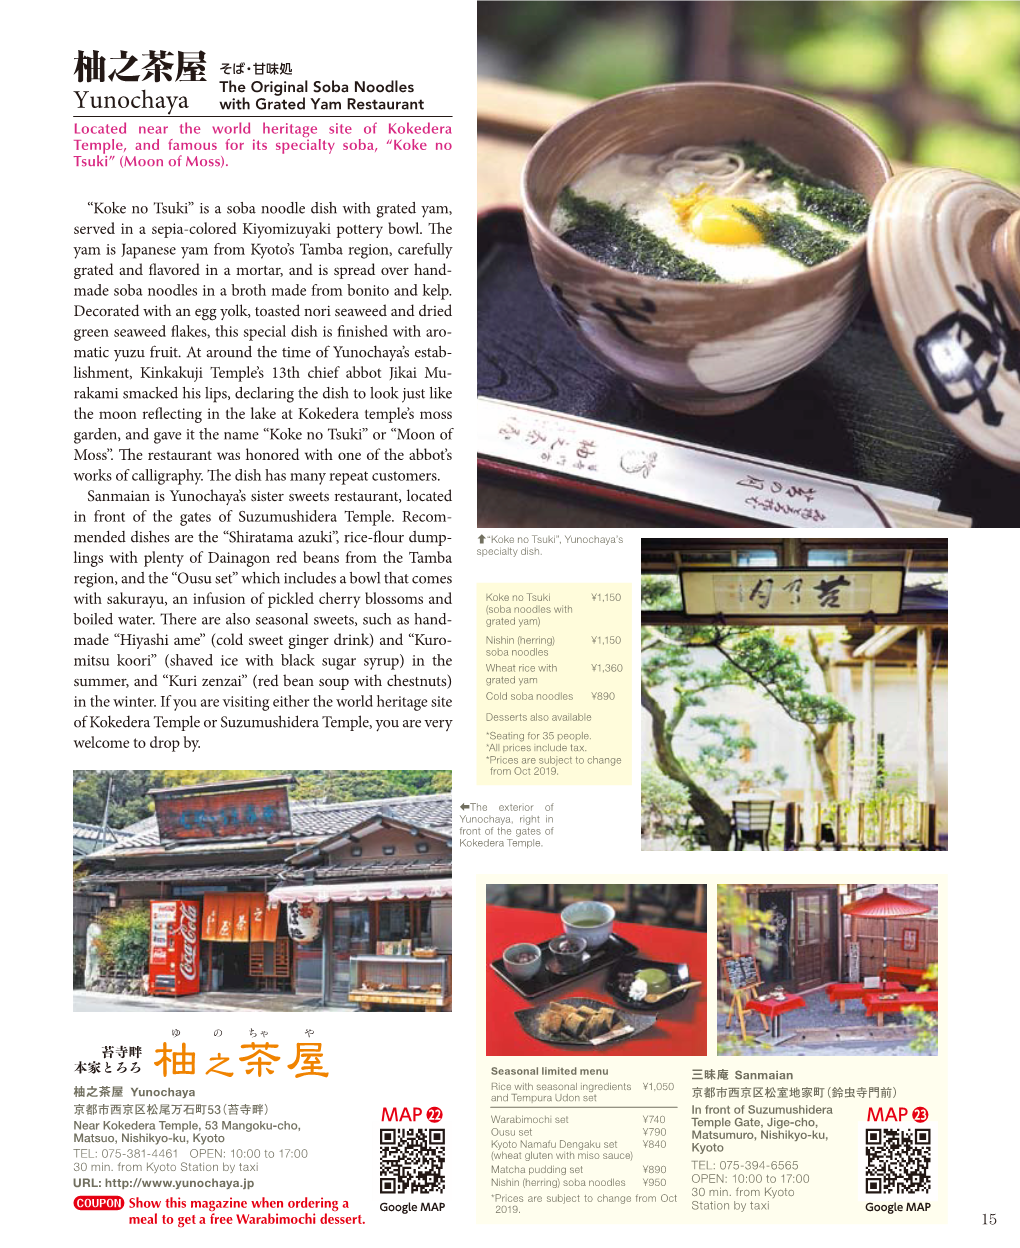 Yunochaya with Grated Yam Restaurant Located Near the World Heritage Site of Kokedera Temple, and Famous for Its Specialty Soba, “Koke No Tsuki” (Moon of Moss)